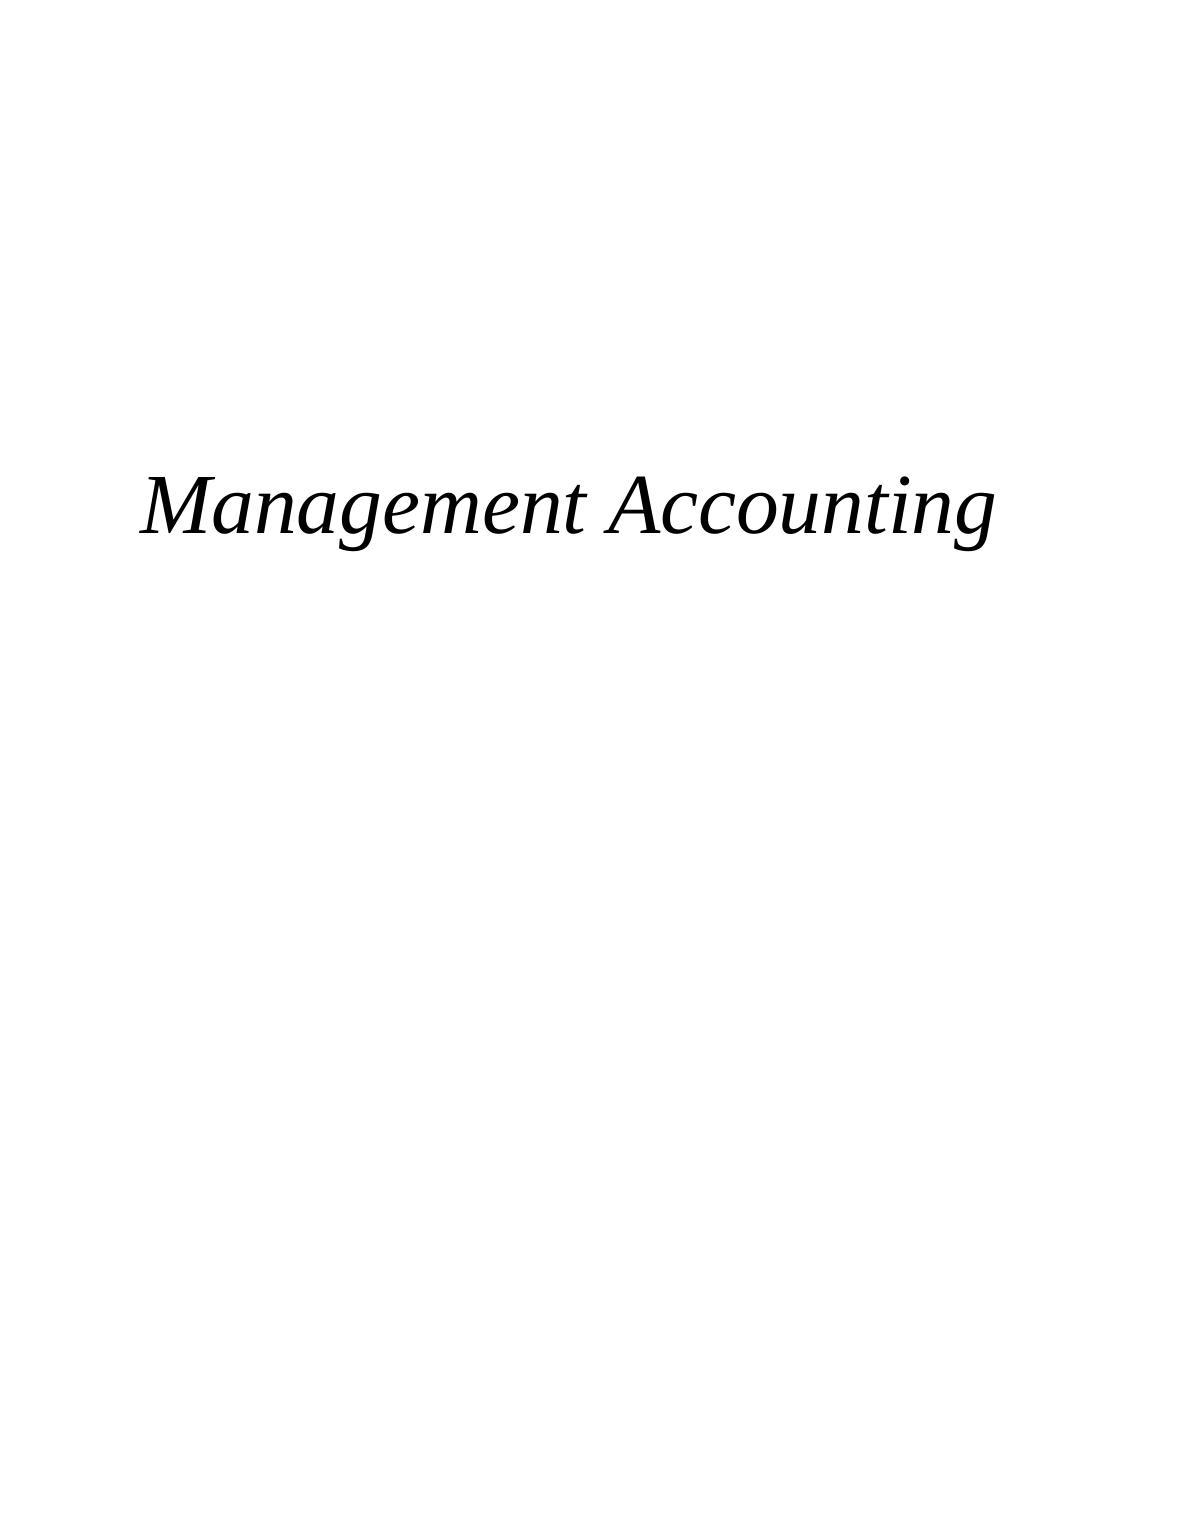 Management Accounting: Systems, Methods, and Planning Tools_1